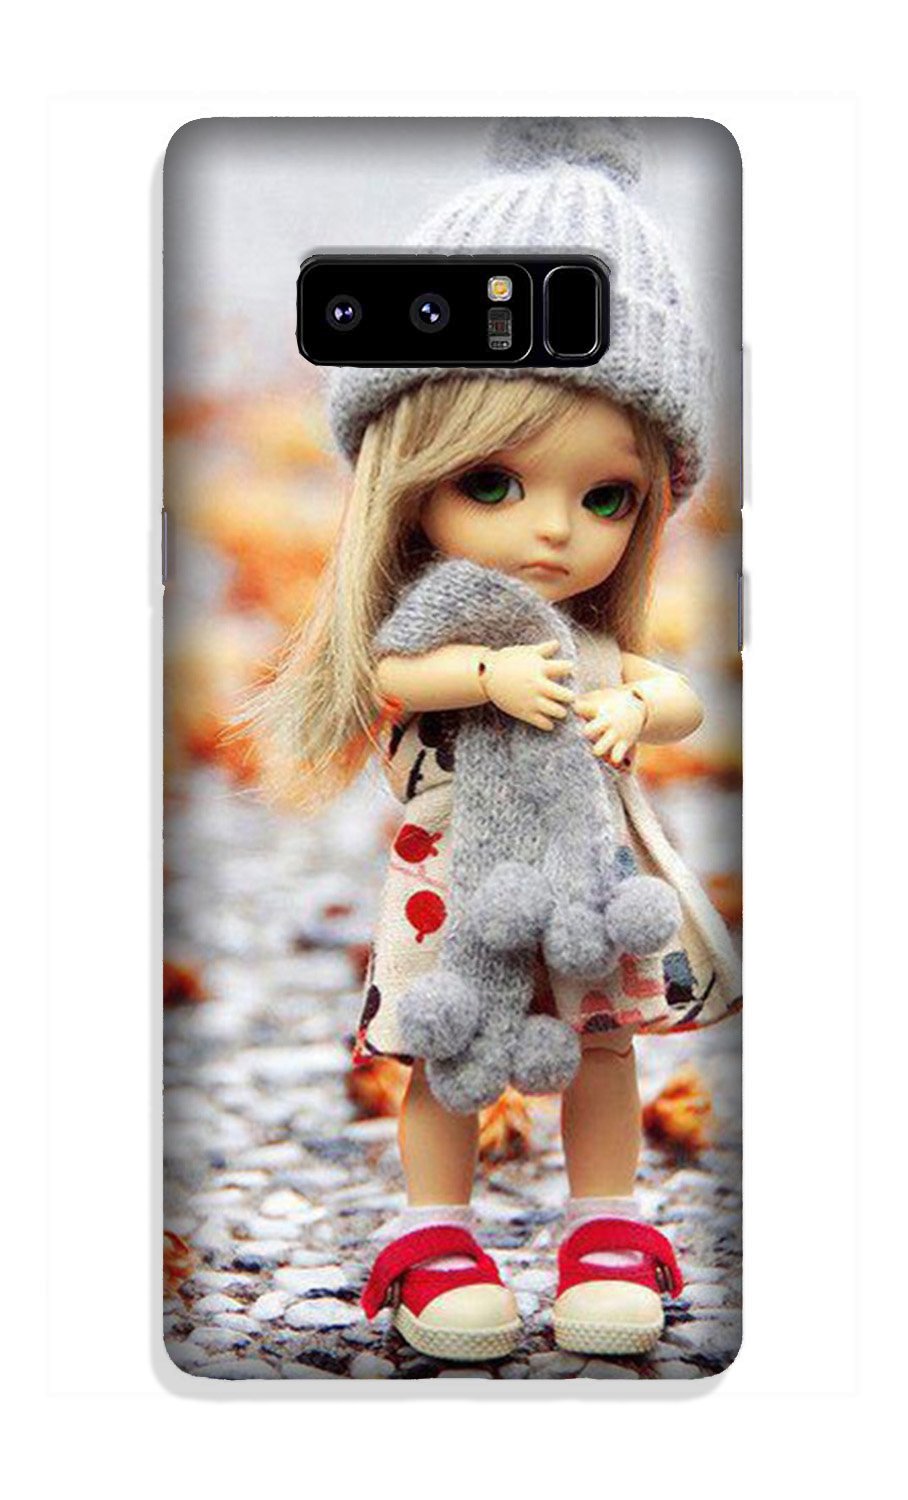 Cute Doll Case for Galaxy Note 8